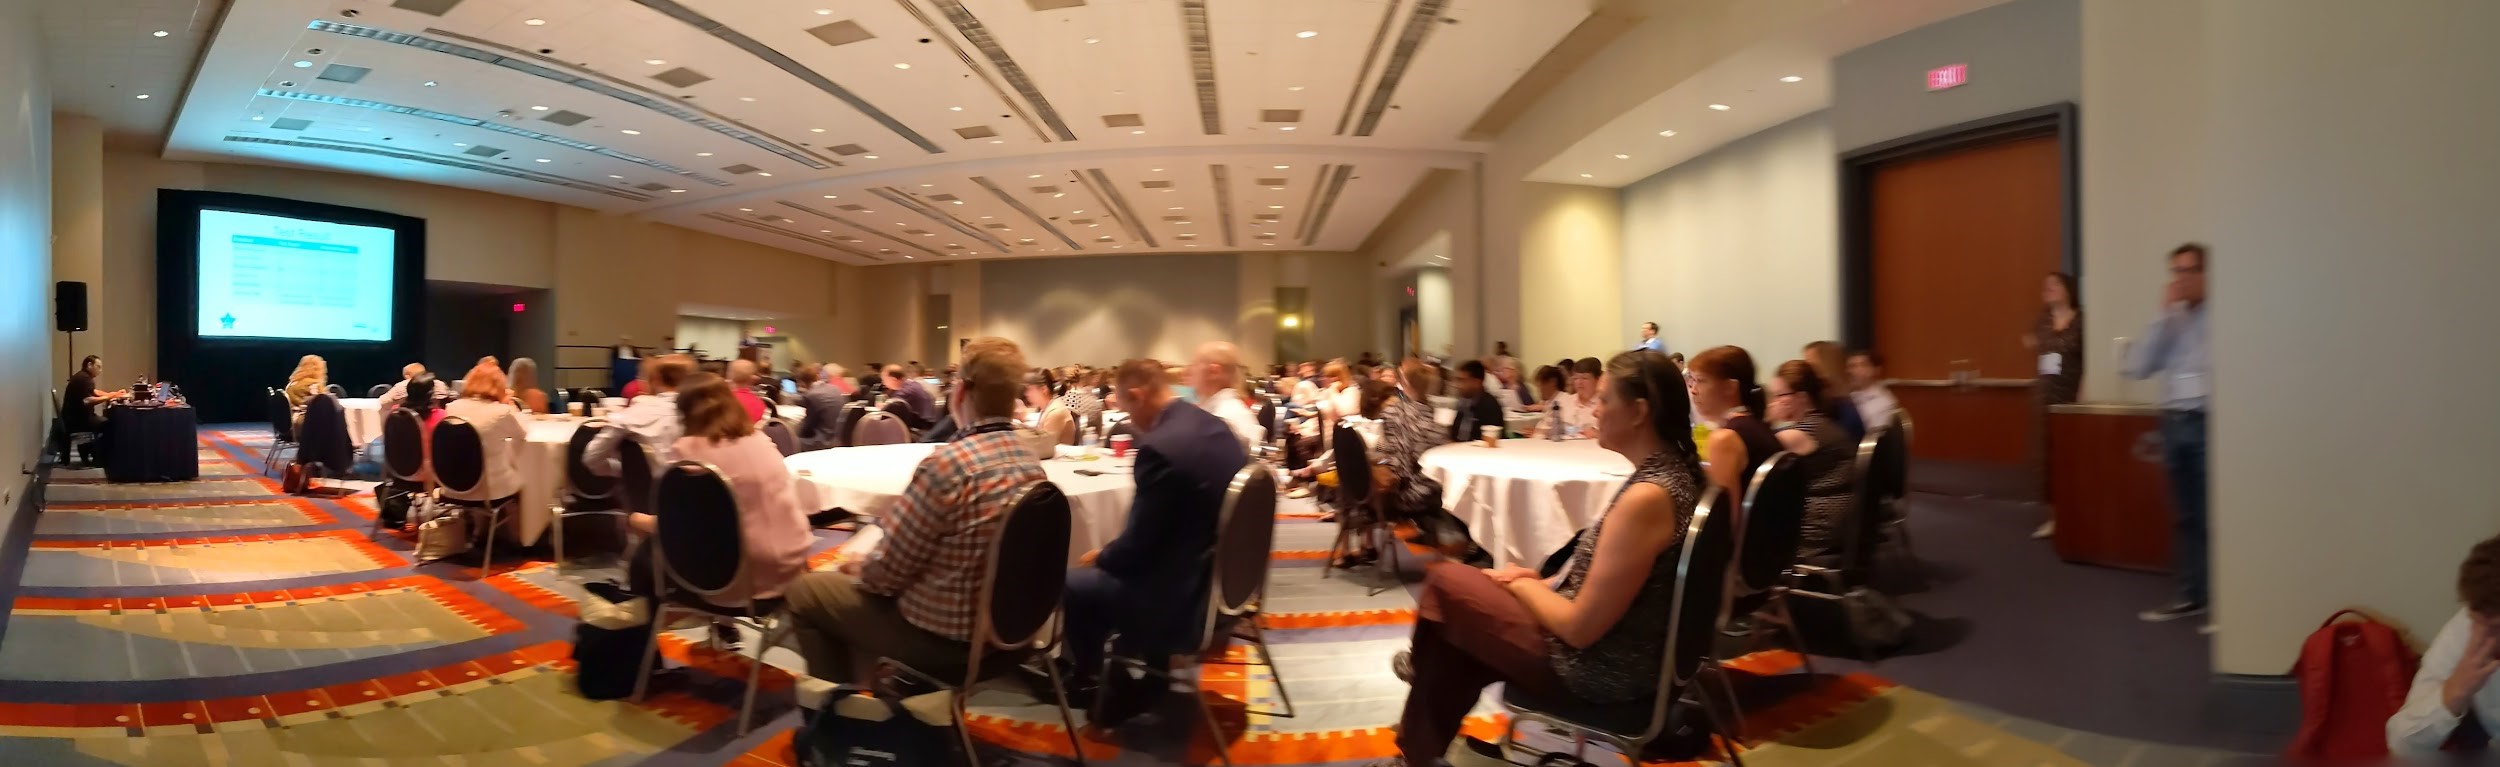 Attendees gather at the AALL Annual Meeting in 2019